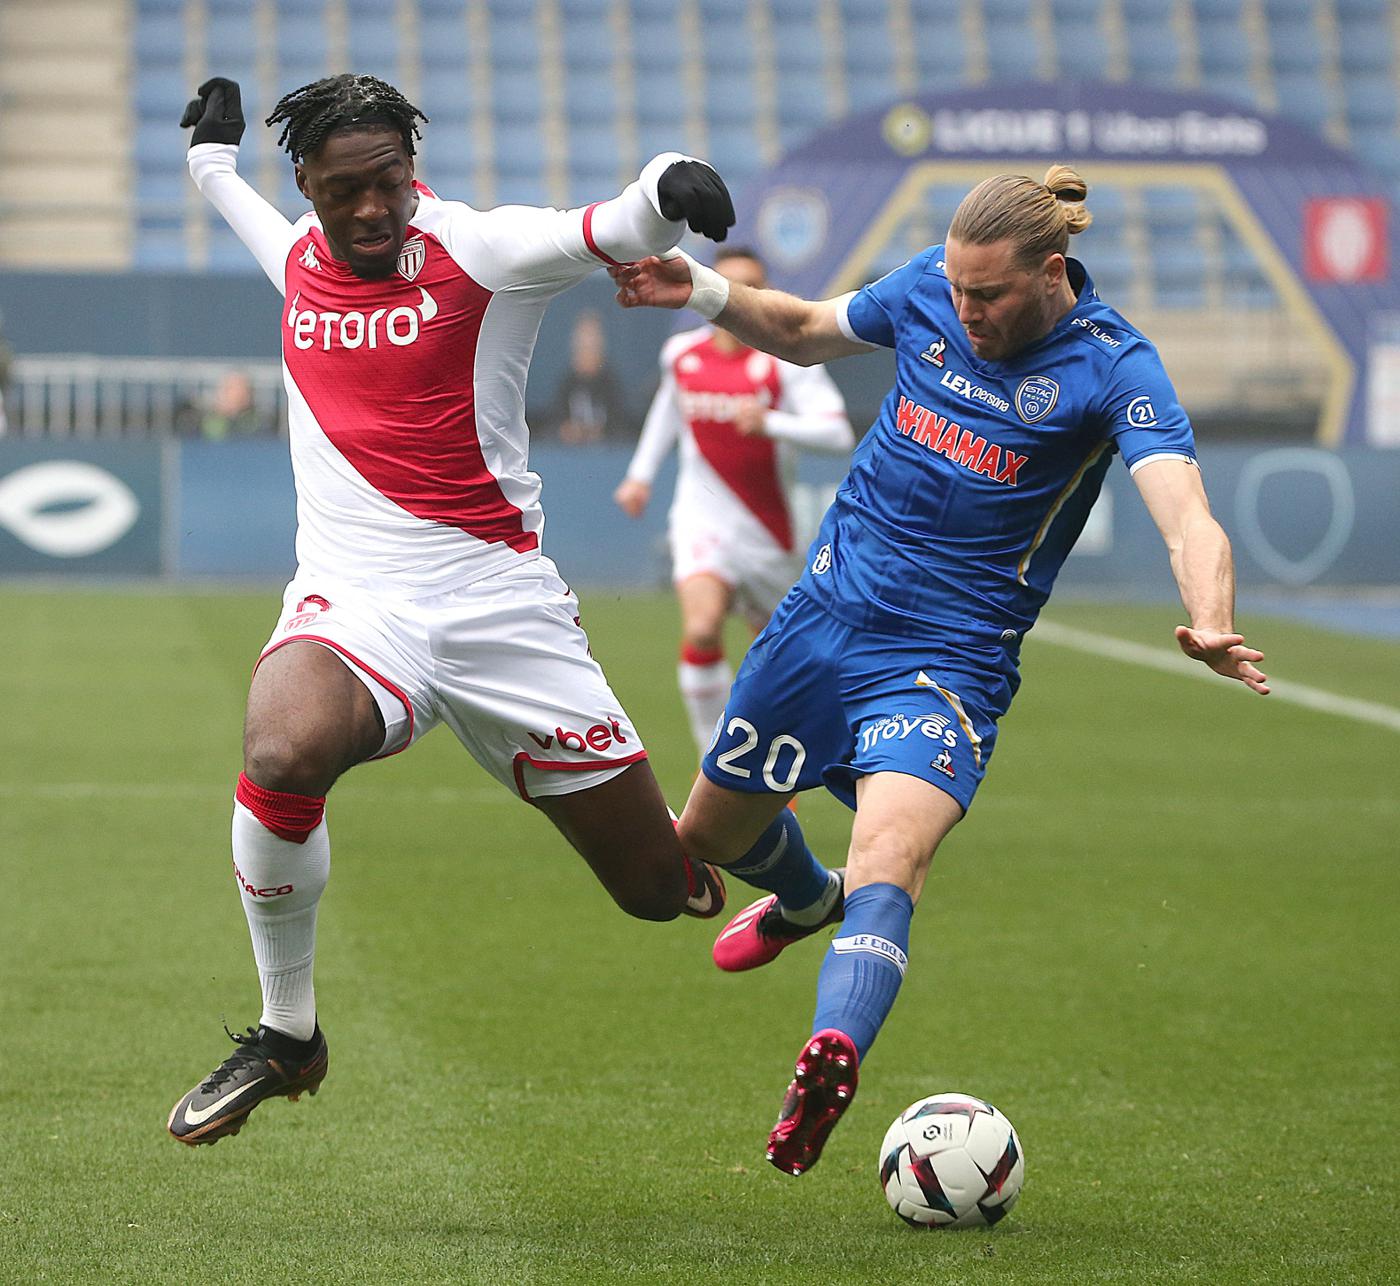 Troyes - Monaco - 2:2. French Championship, 26th round. Match review, statistics.